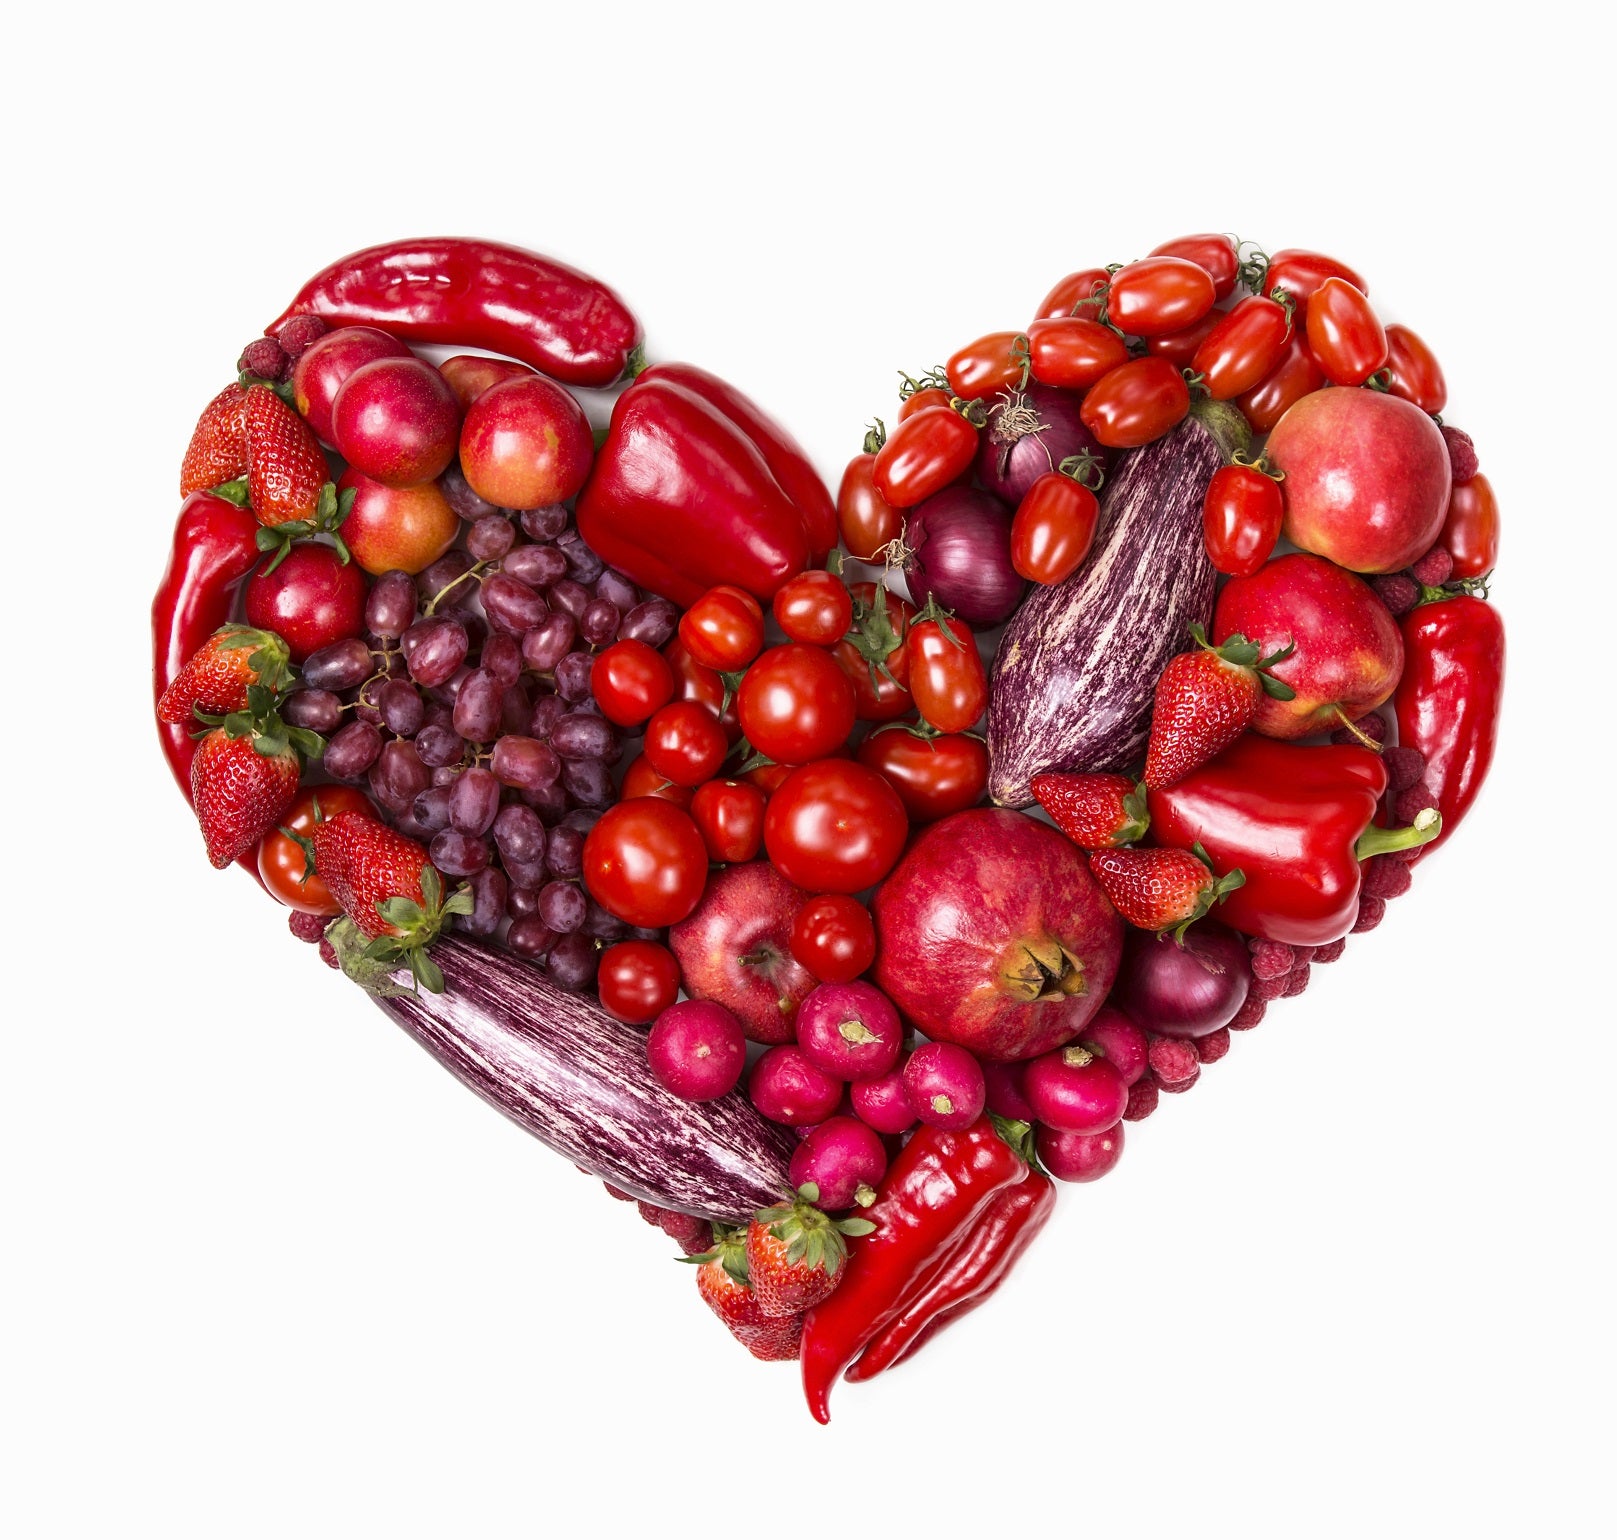 In Love with Food: Selecting, Preparing and Eating with Purpose